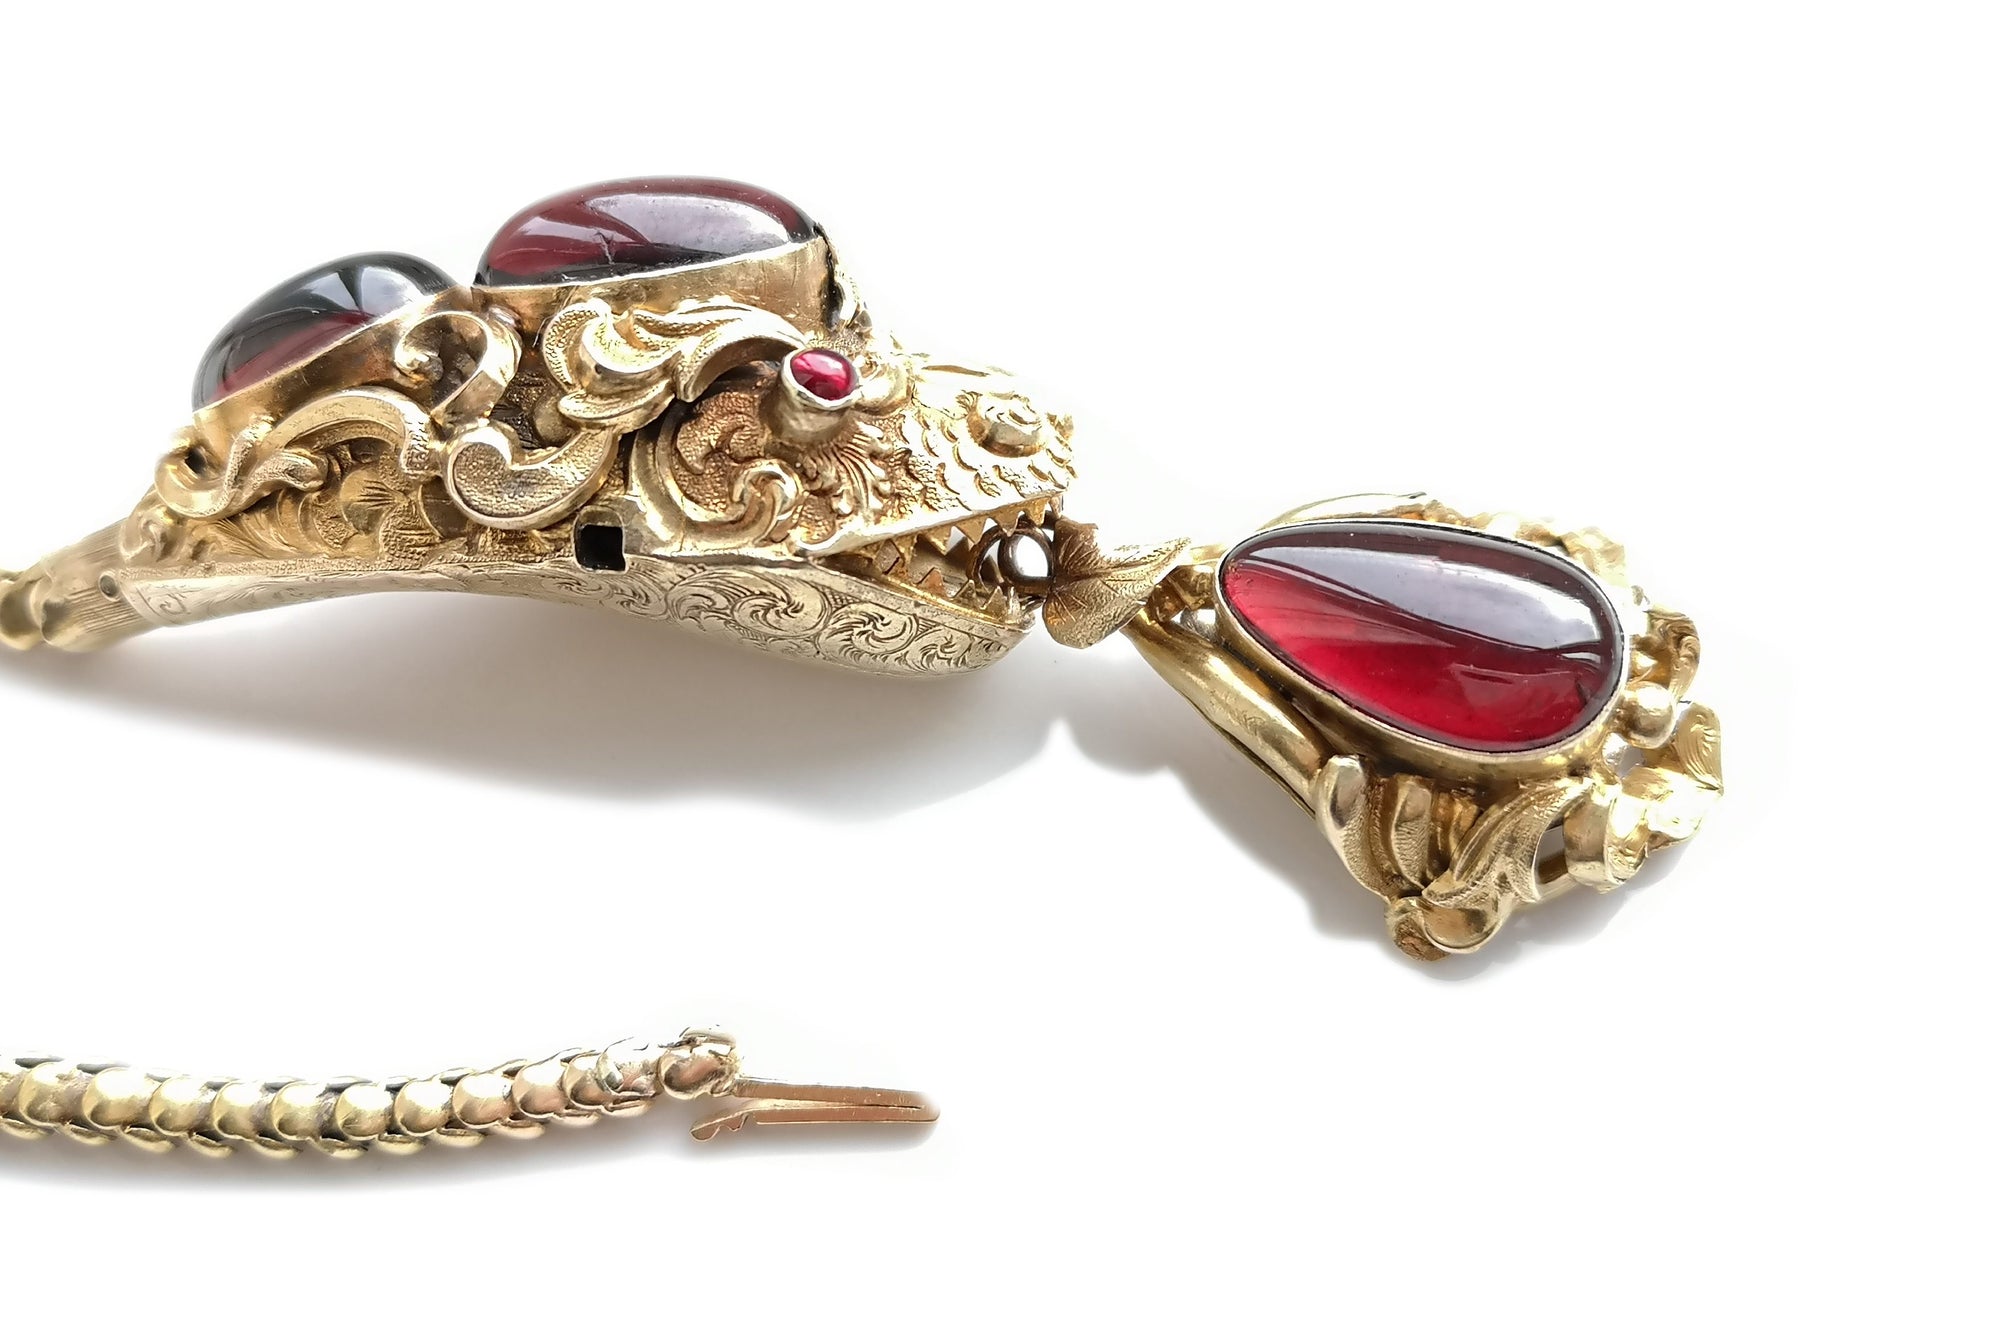 Victorian Snake / Serpent Necklace in 18k Gold set with Garnets